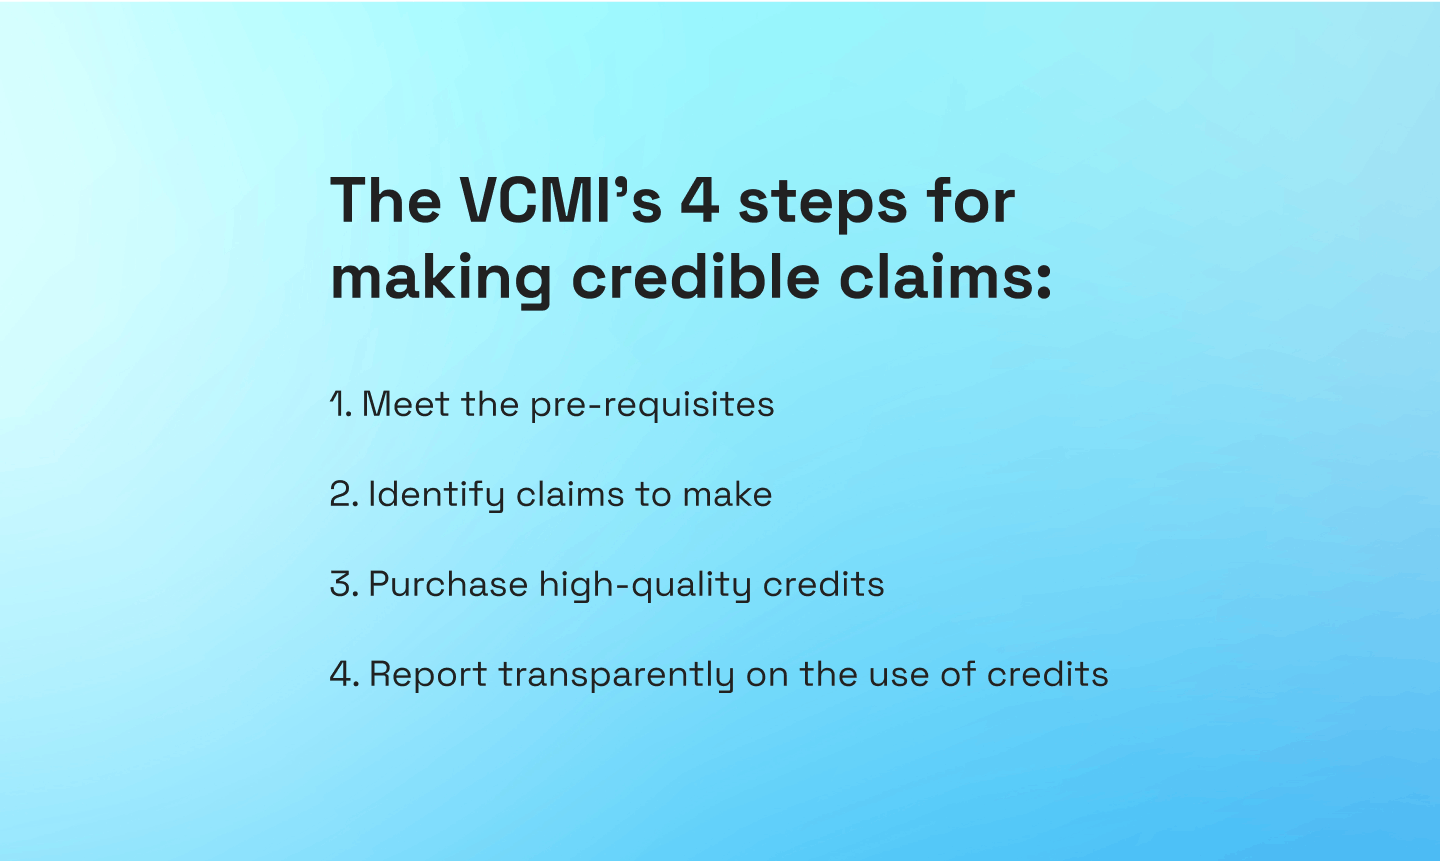 The VCMI's 4 steps for making credible claims